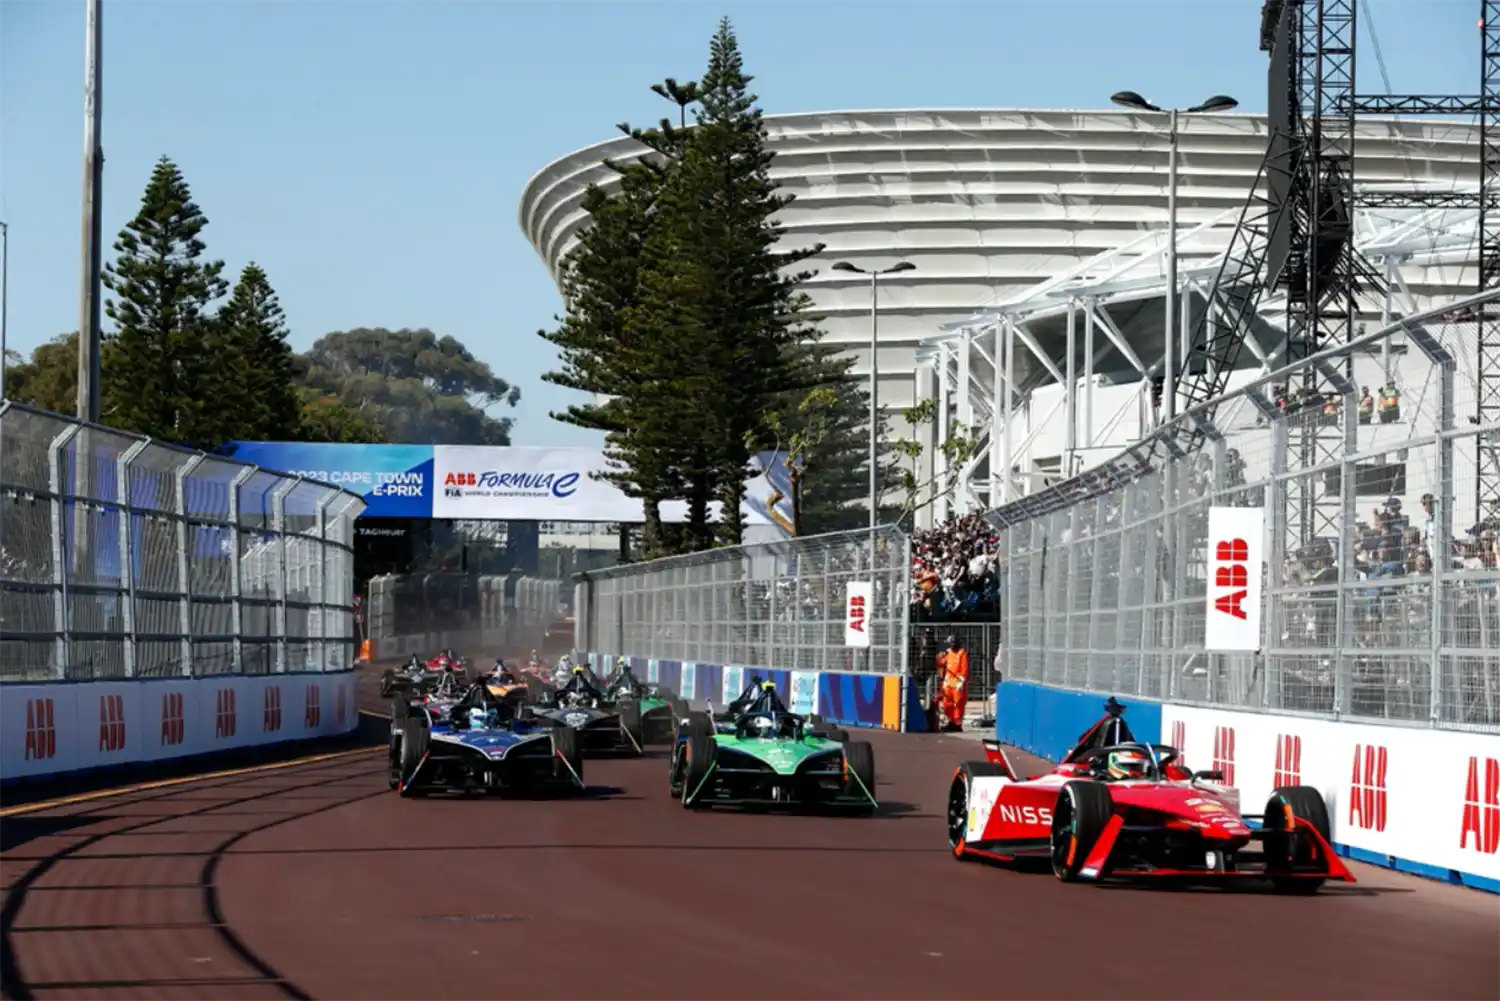 USA And Germany Battle For Lead In Formula E World Championship Wheelz-English